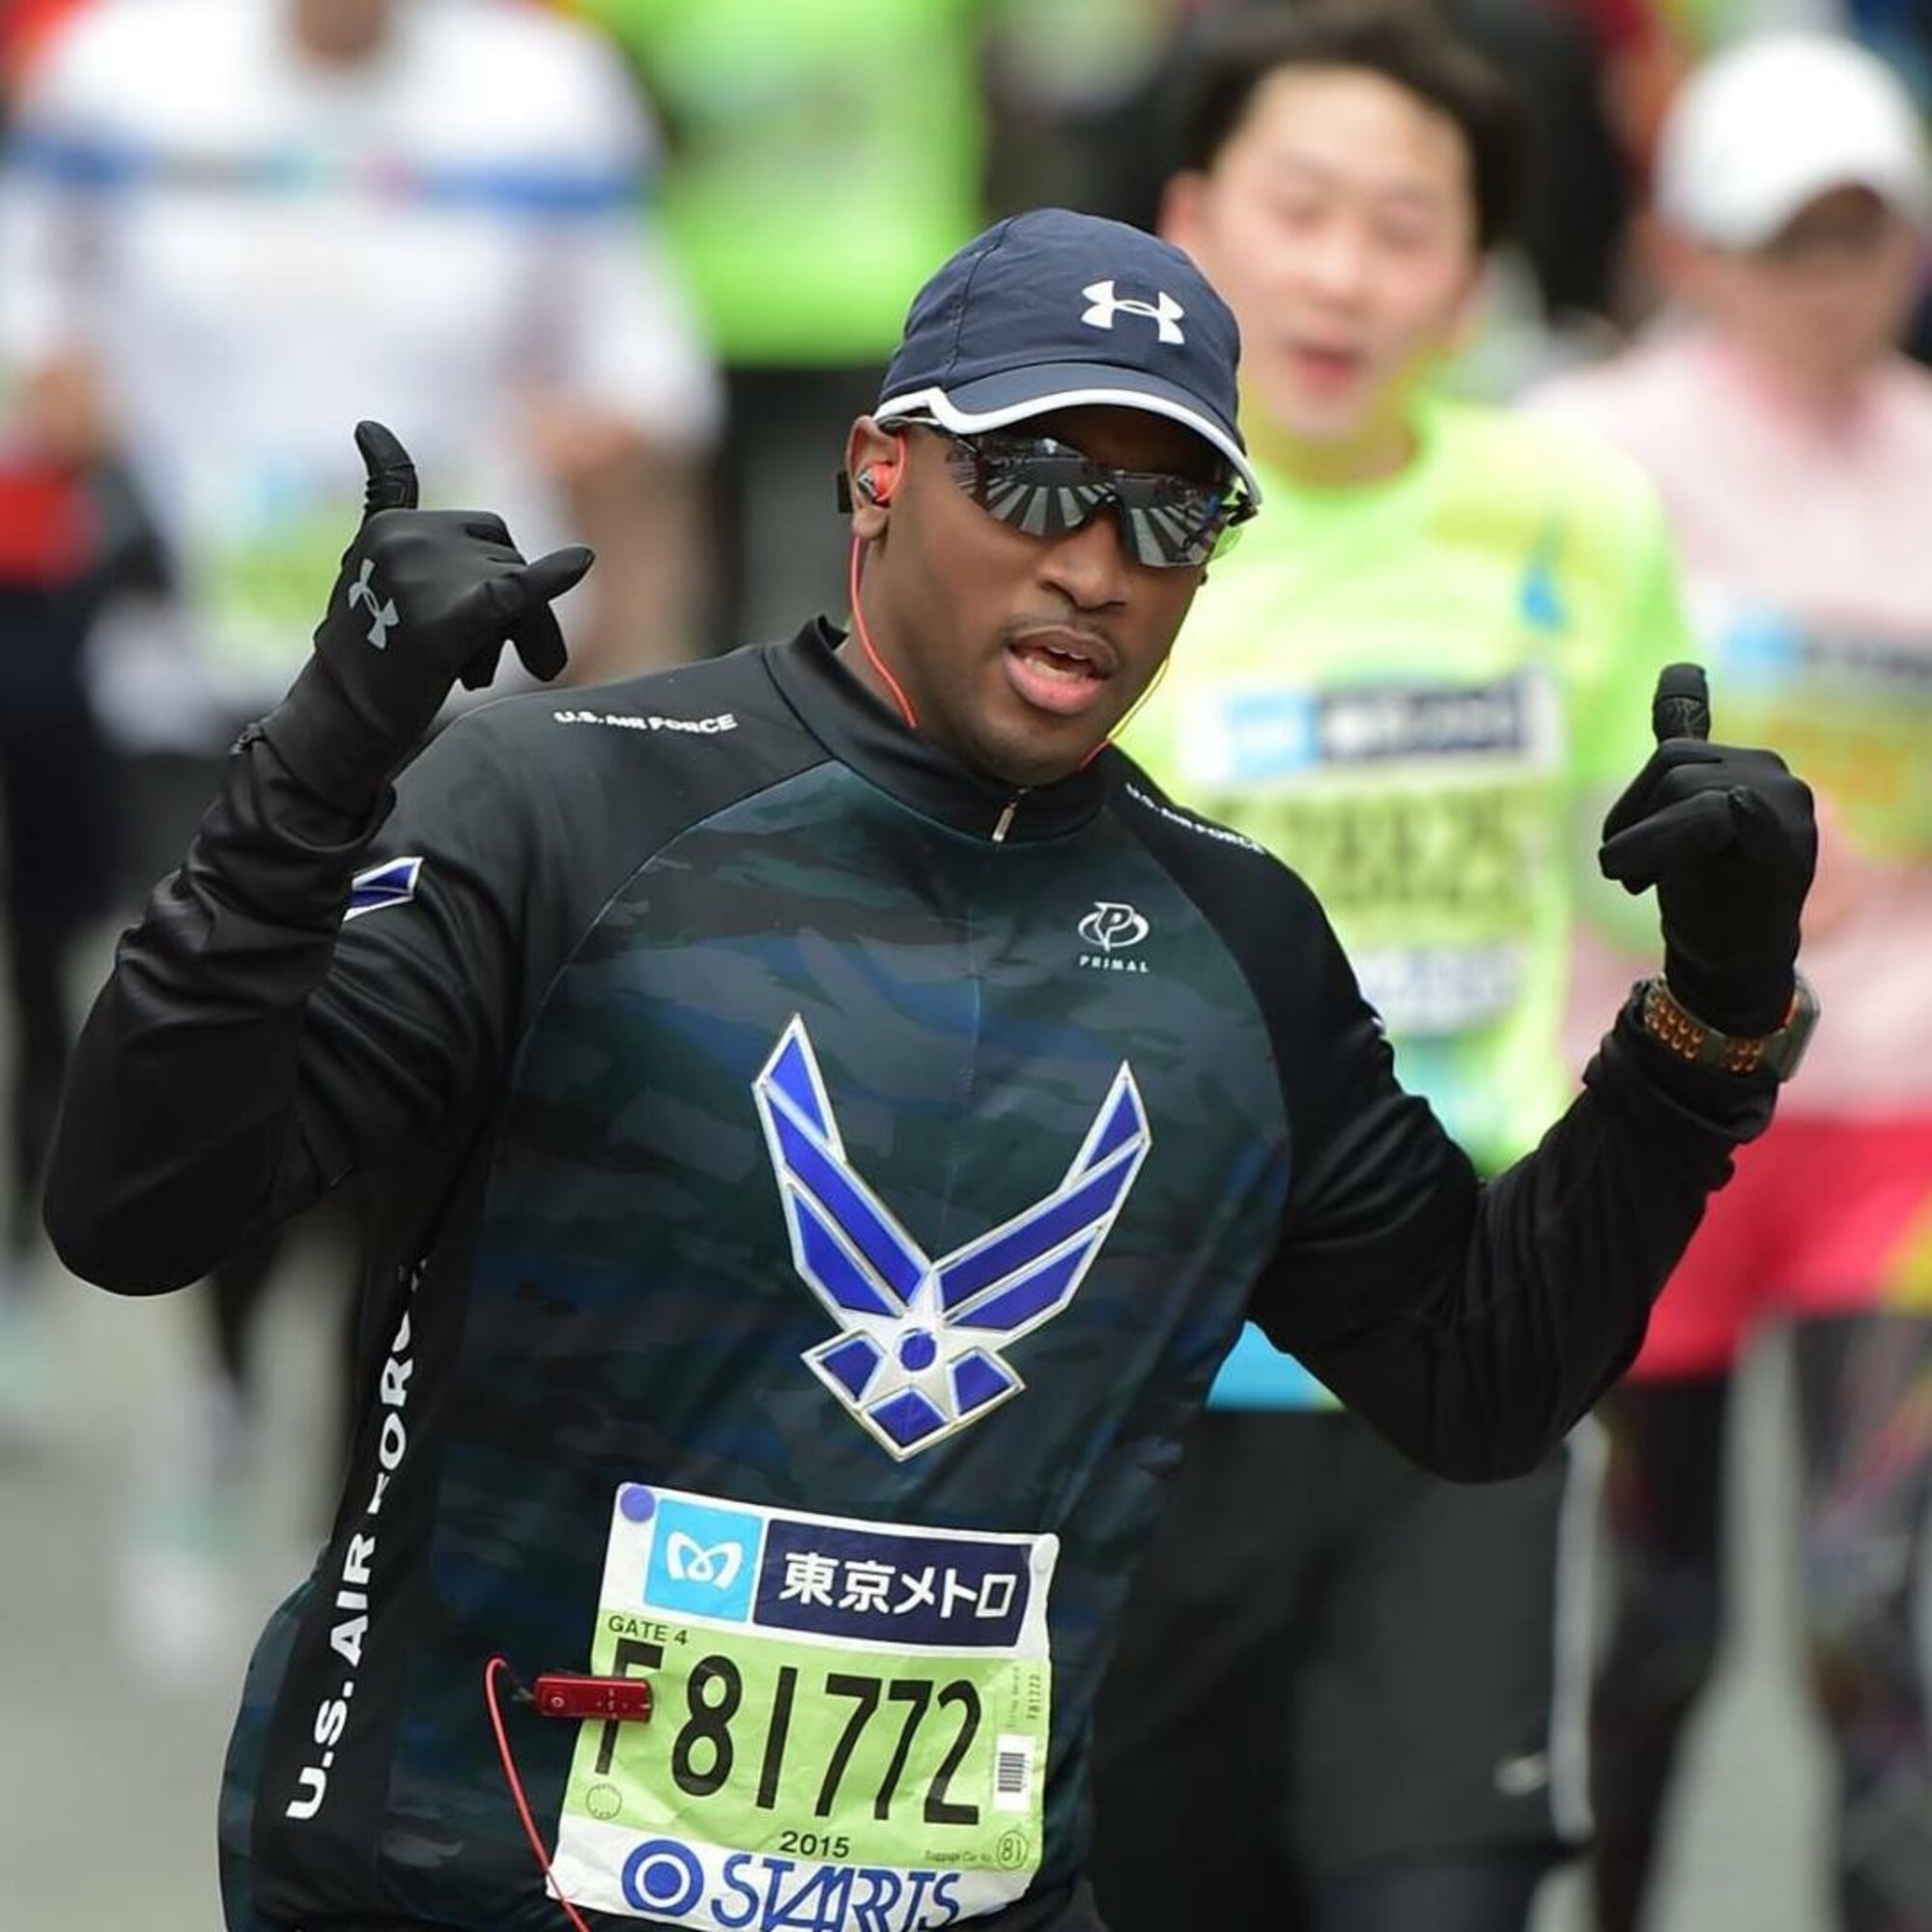 U.S. Air Force Tech. Sgt. Gerard Tilley, the 35th Maintenance Group education and training manager, poses for a photo during the 2015 Tokyo Marathon in Tokyo, Japan, Feb. 22, 2015. Tilley has received 19 medals and has even completed an ultra-marathon, requiring him to run a 100K. (Courtesy Photo)